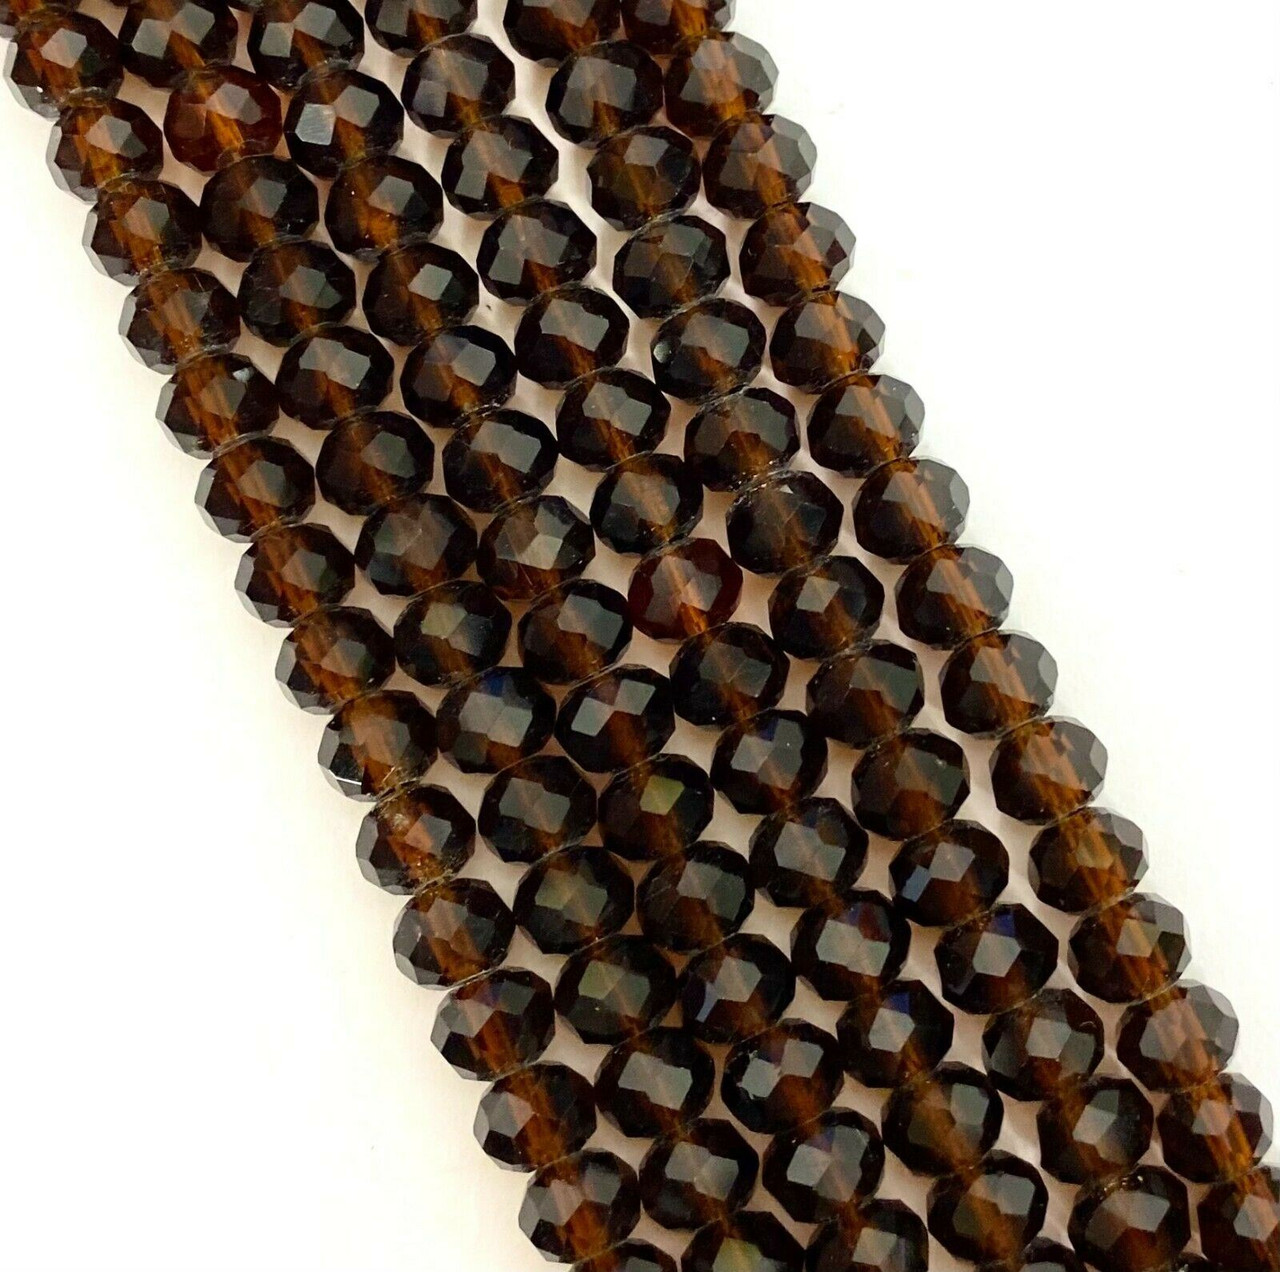 Dark Brown 12x9mm Faceted Glass Rondelles